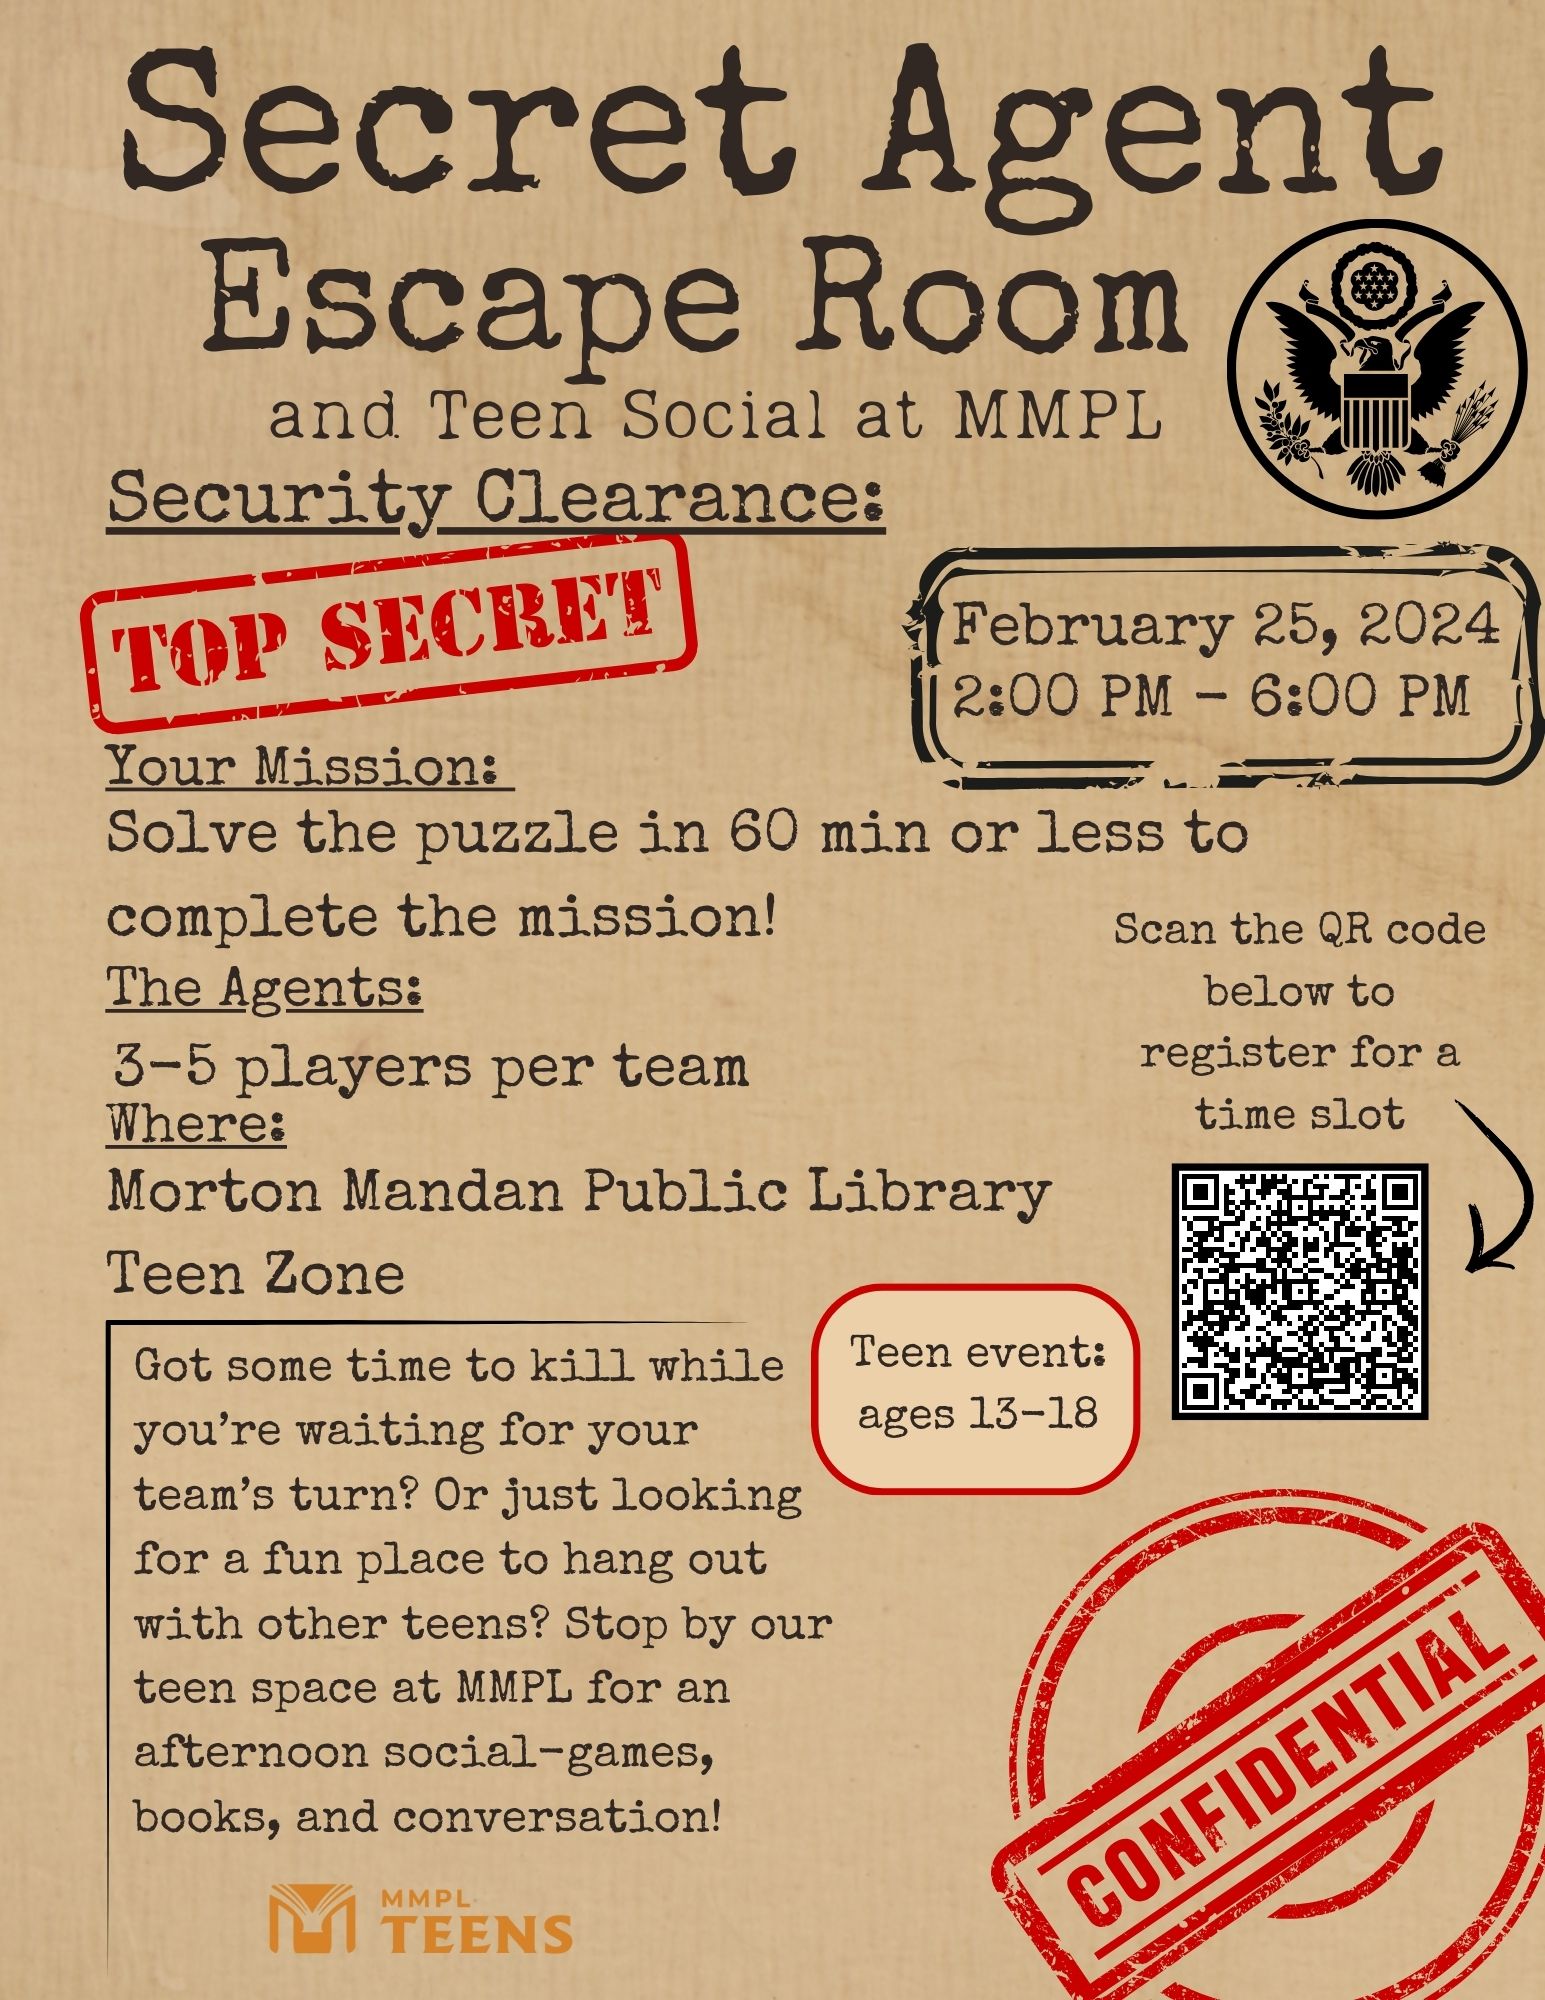 flyer with description and information about escape room event